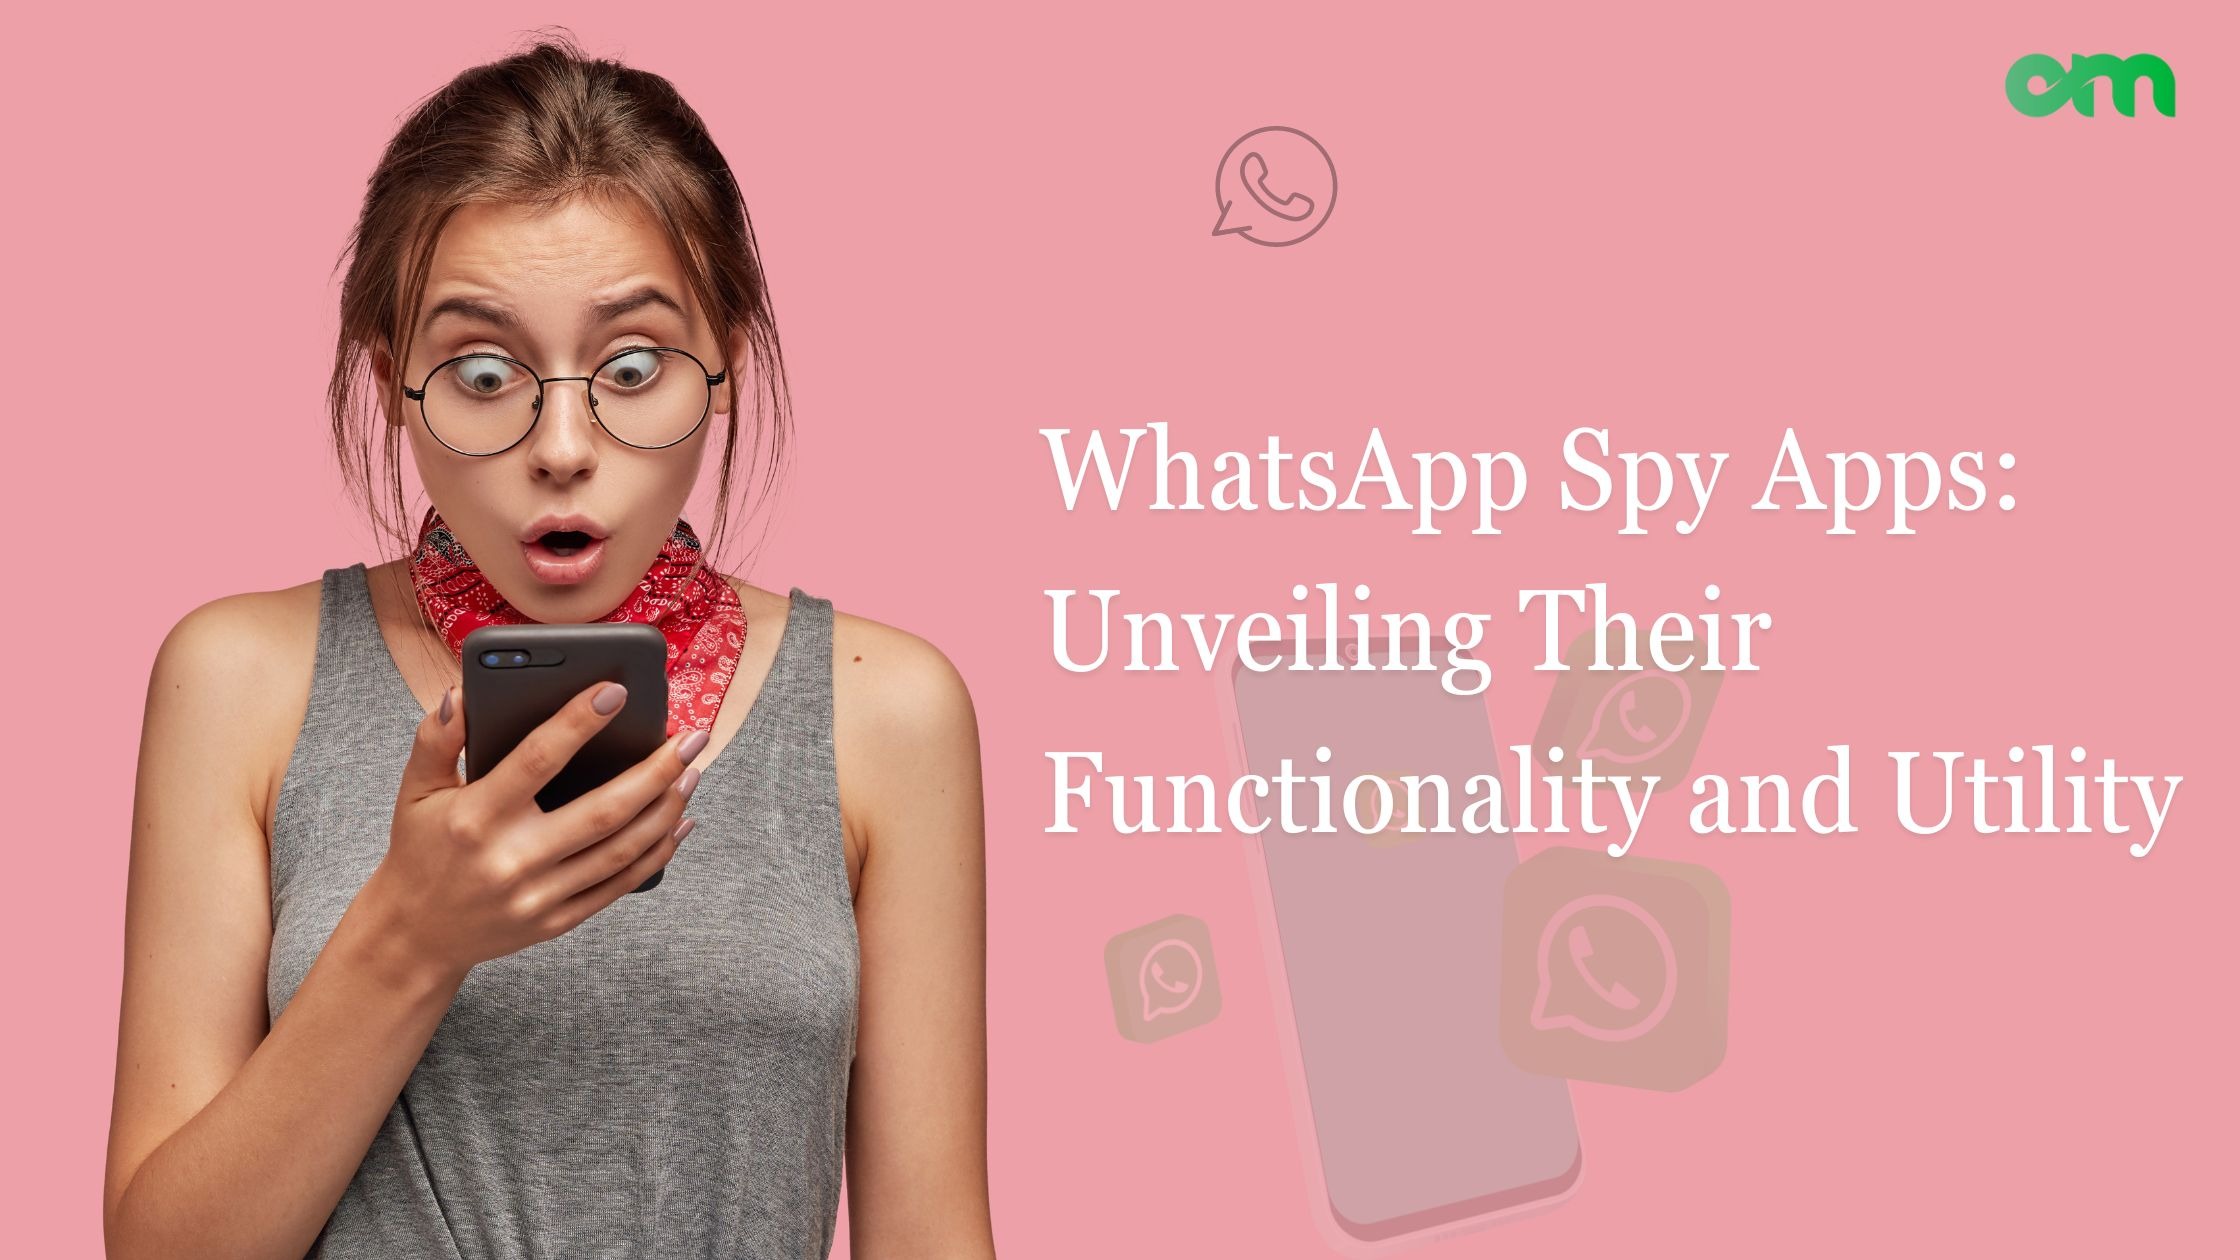 WhatsApp Spy Apps: Unveiling Their Functionality and Utility – Telegraph